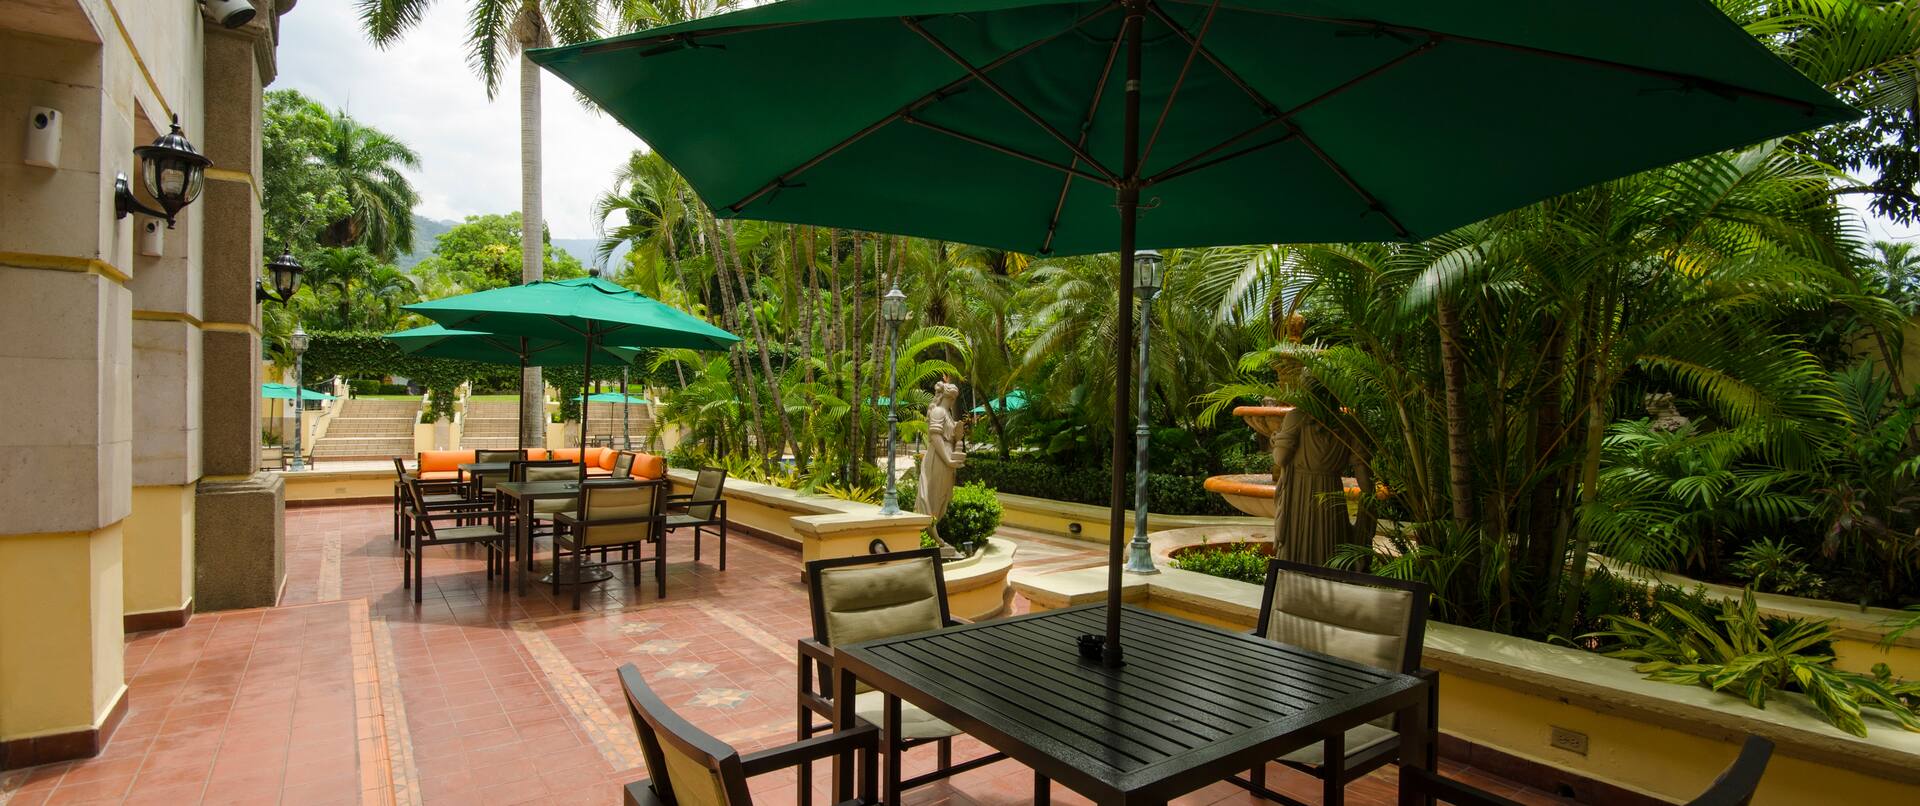 Hotel Outdoor Patio Area with Chairs, Tables and Umbrellas